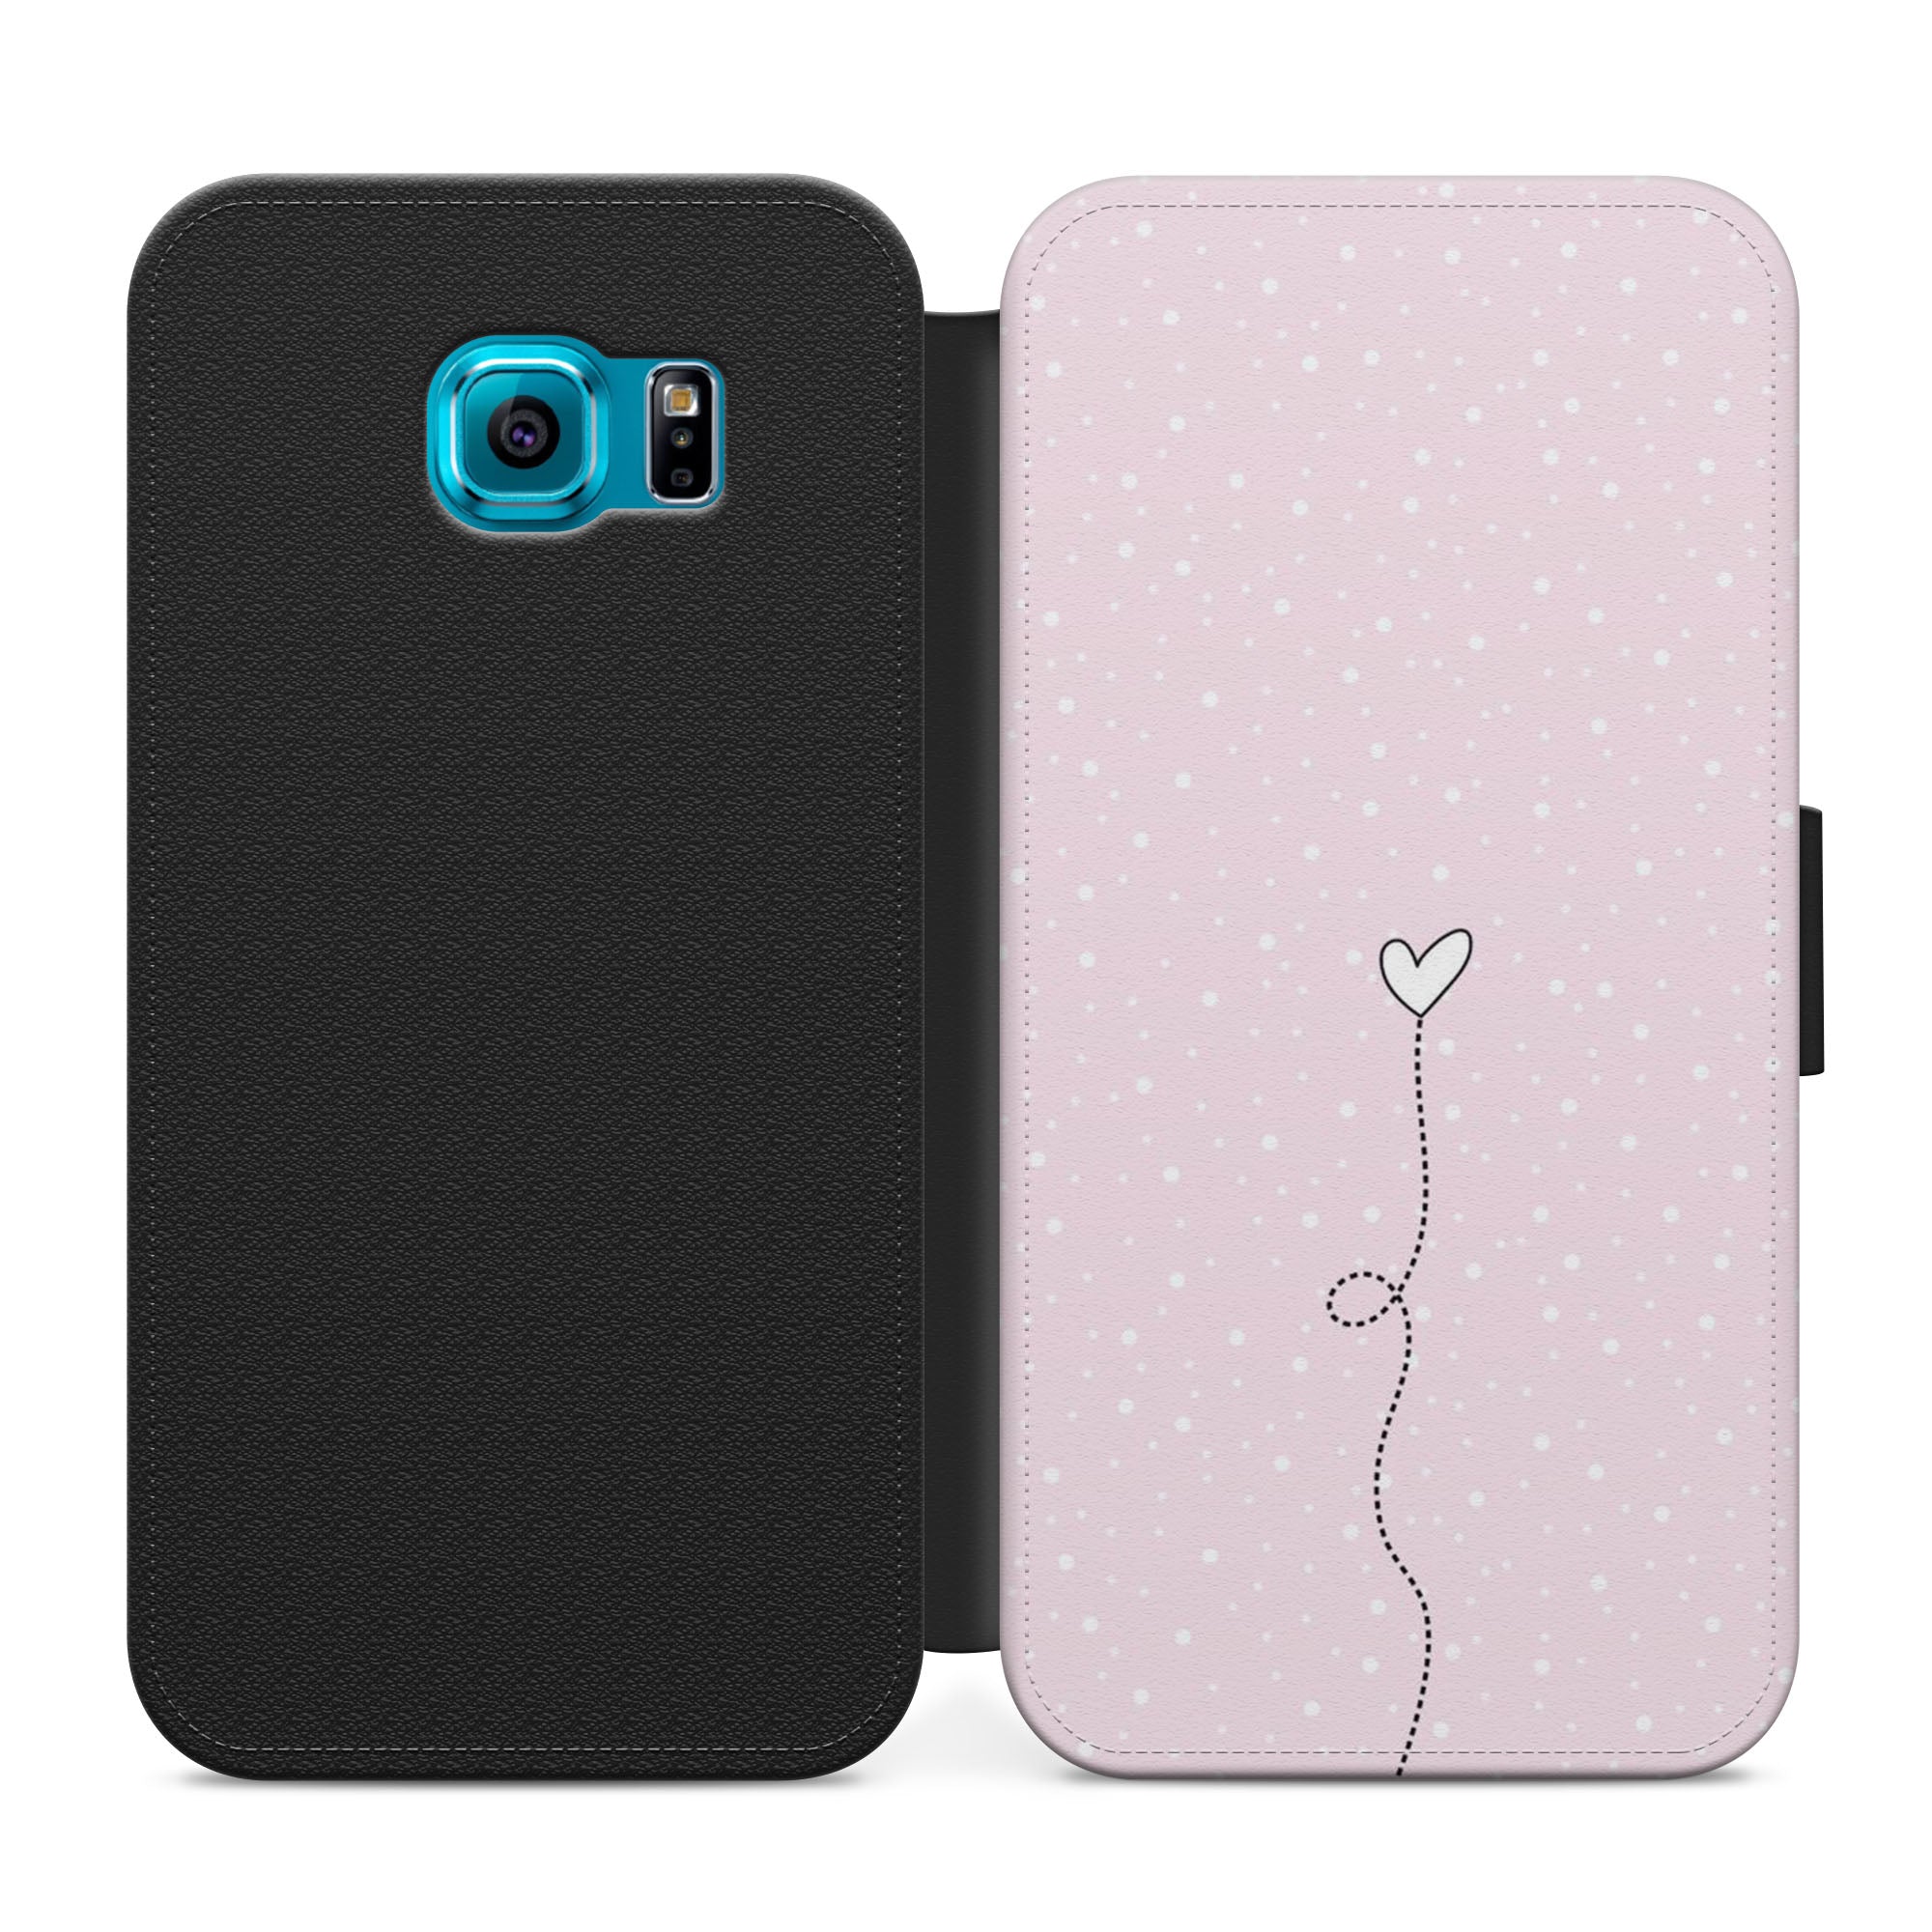 Love Heart On Dots Faux Leather Flip Case Wallet for iPhone / Samsung